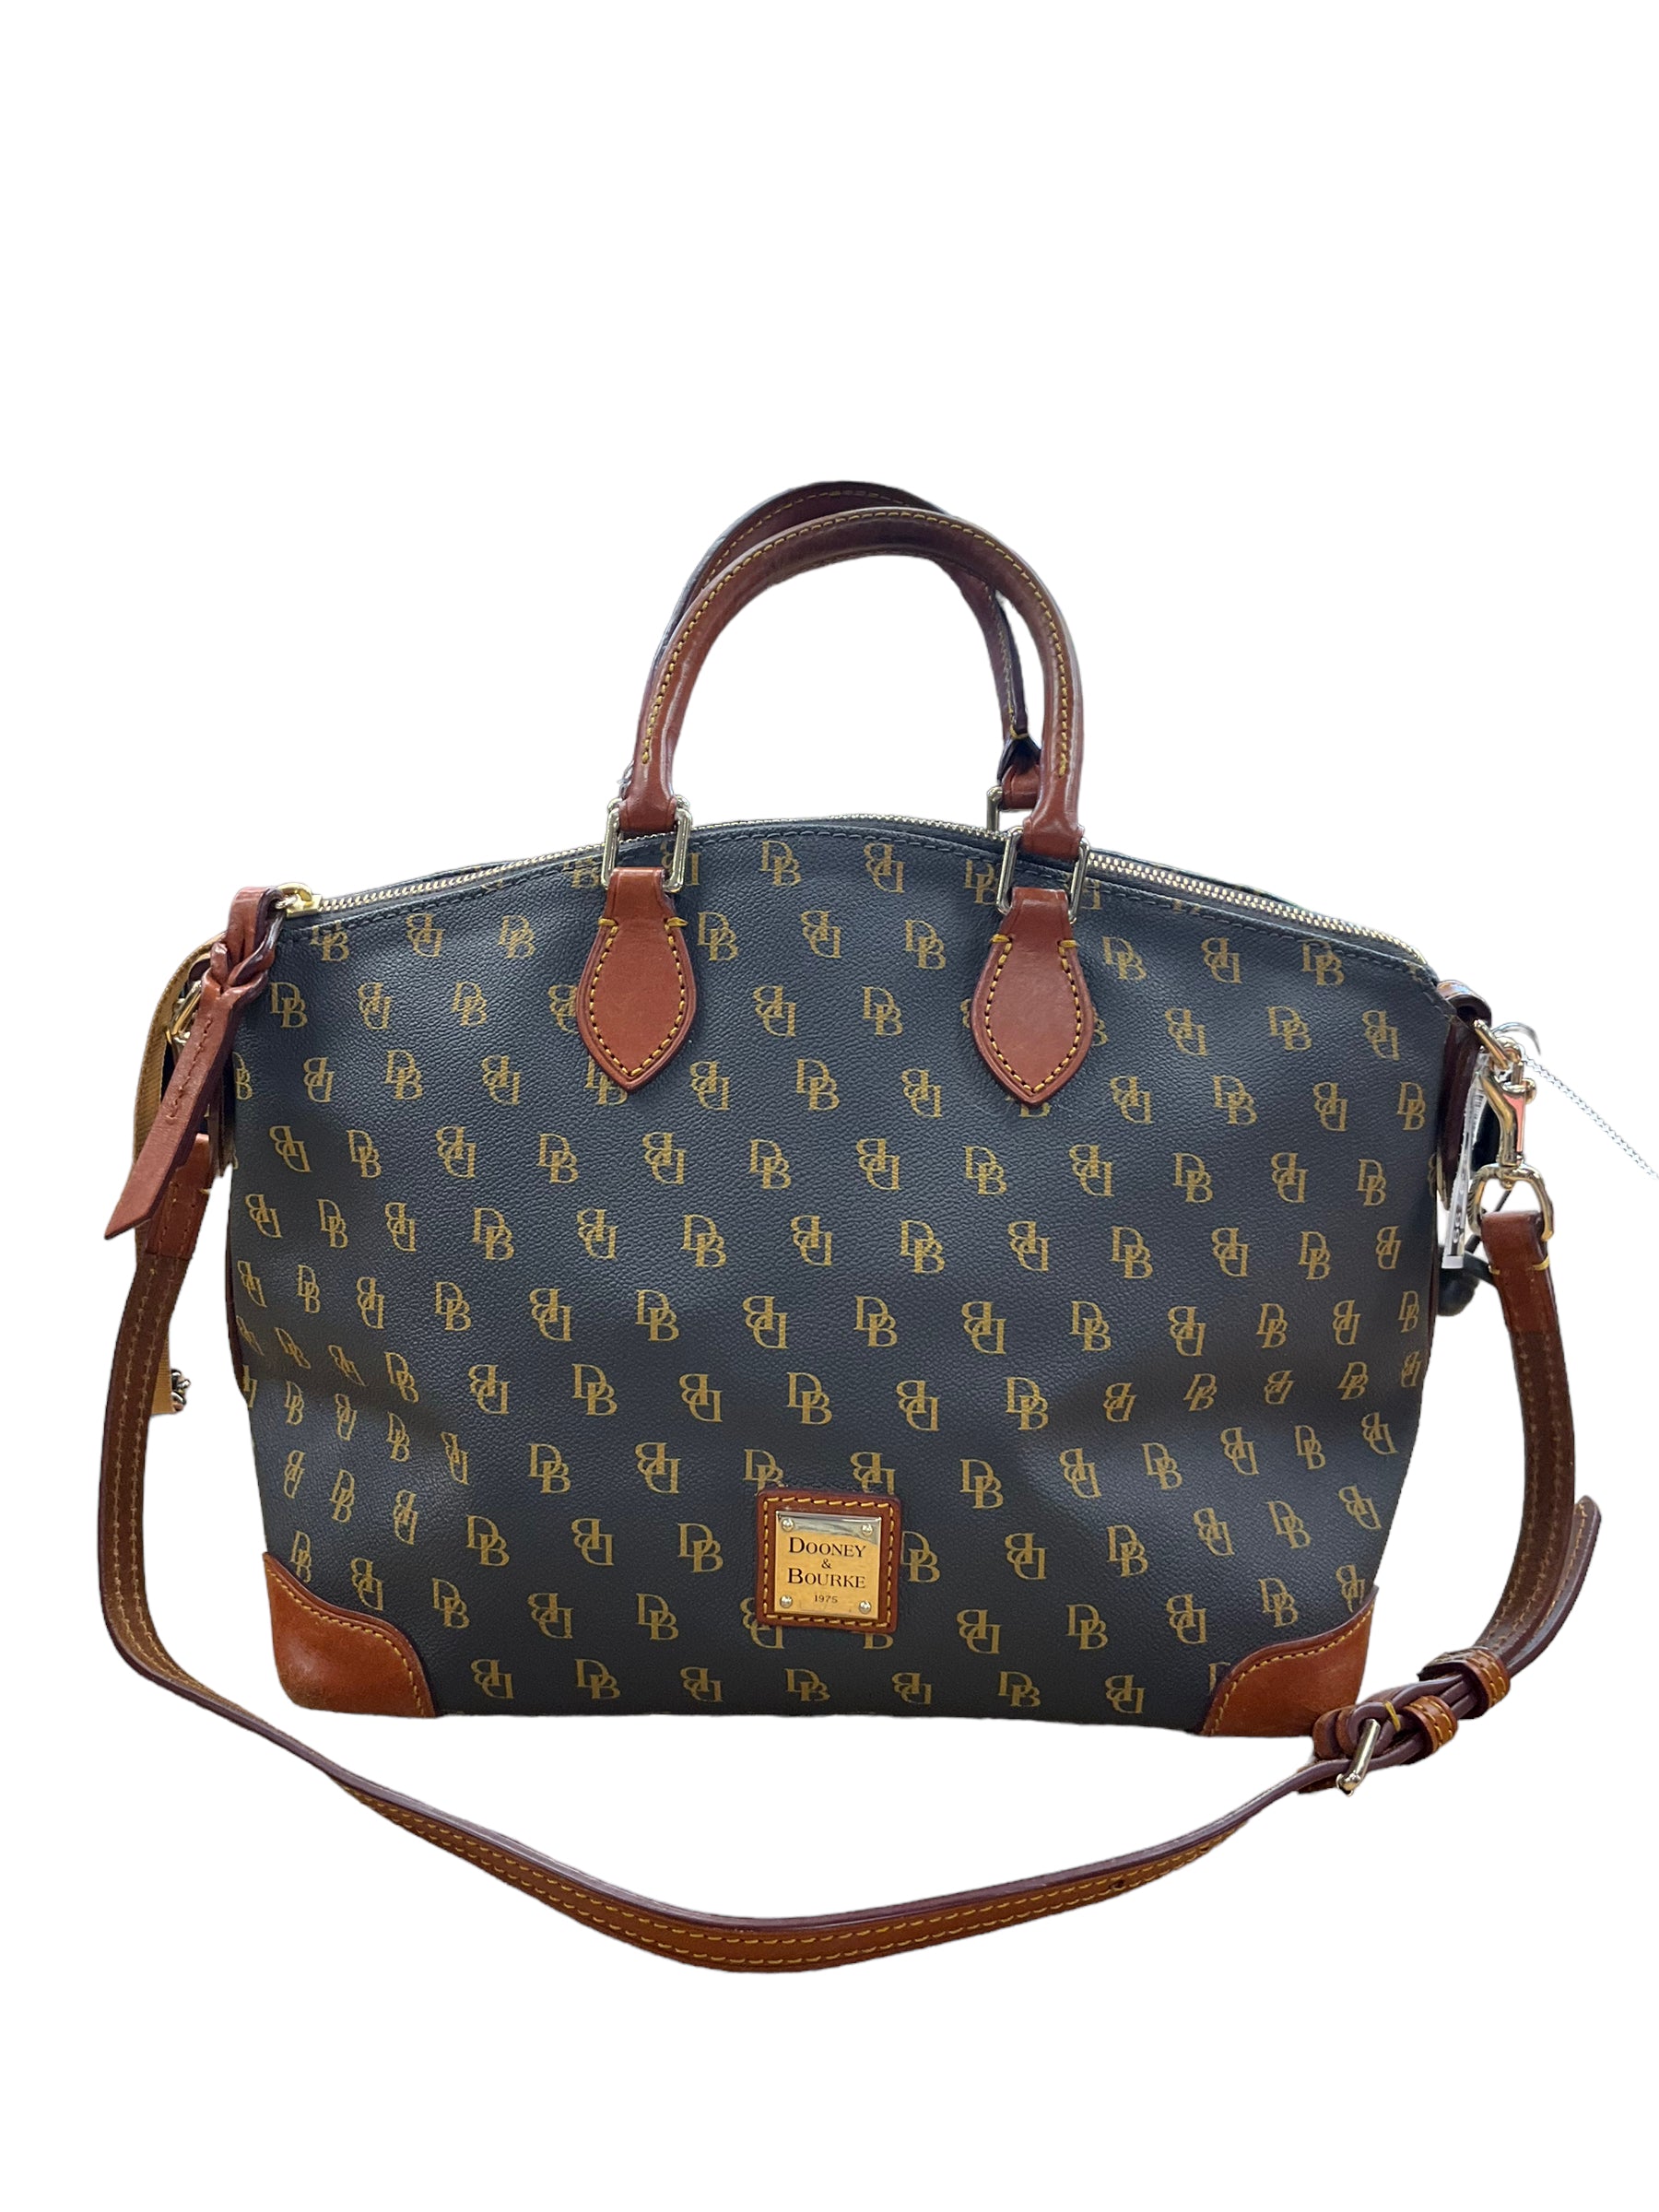 Thoughts on Dooney and Bourke? : r/handbags